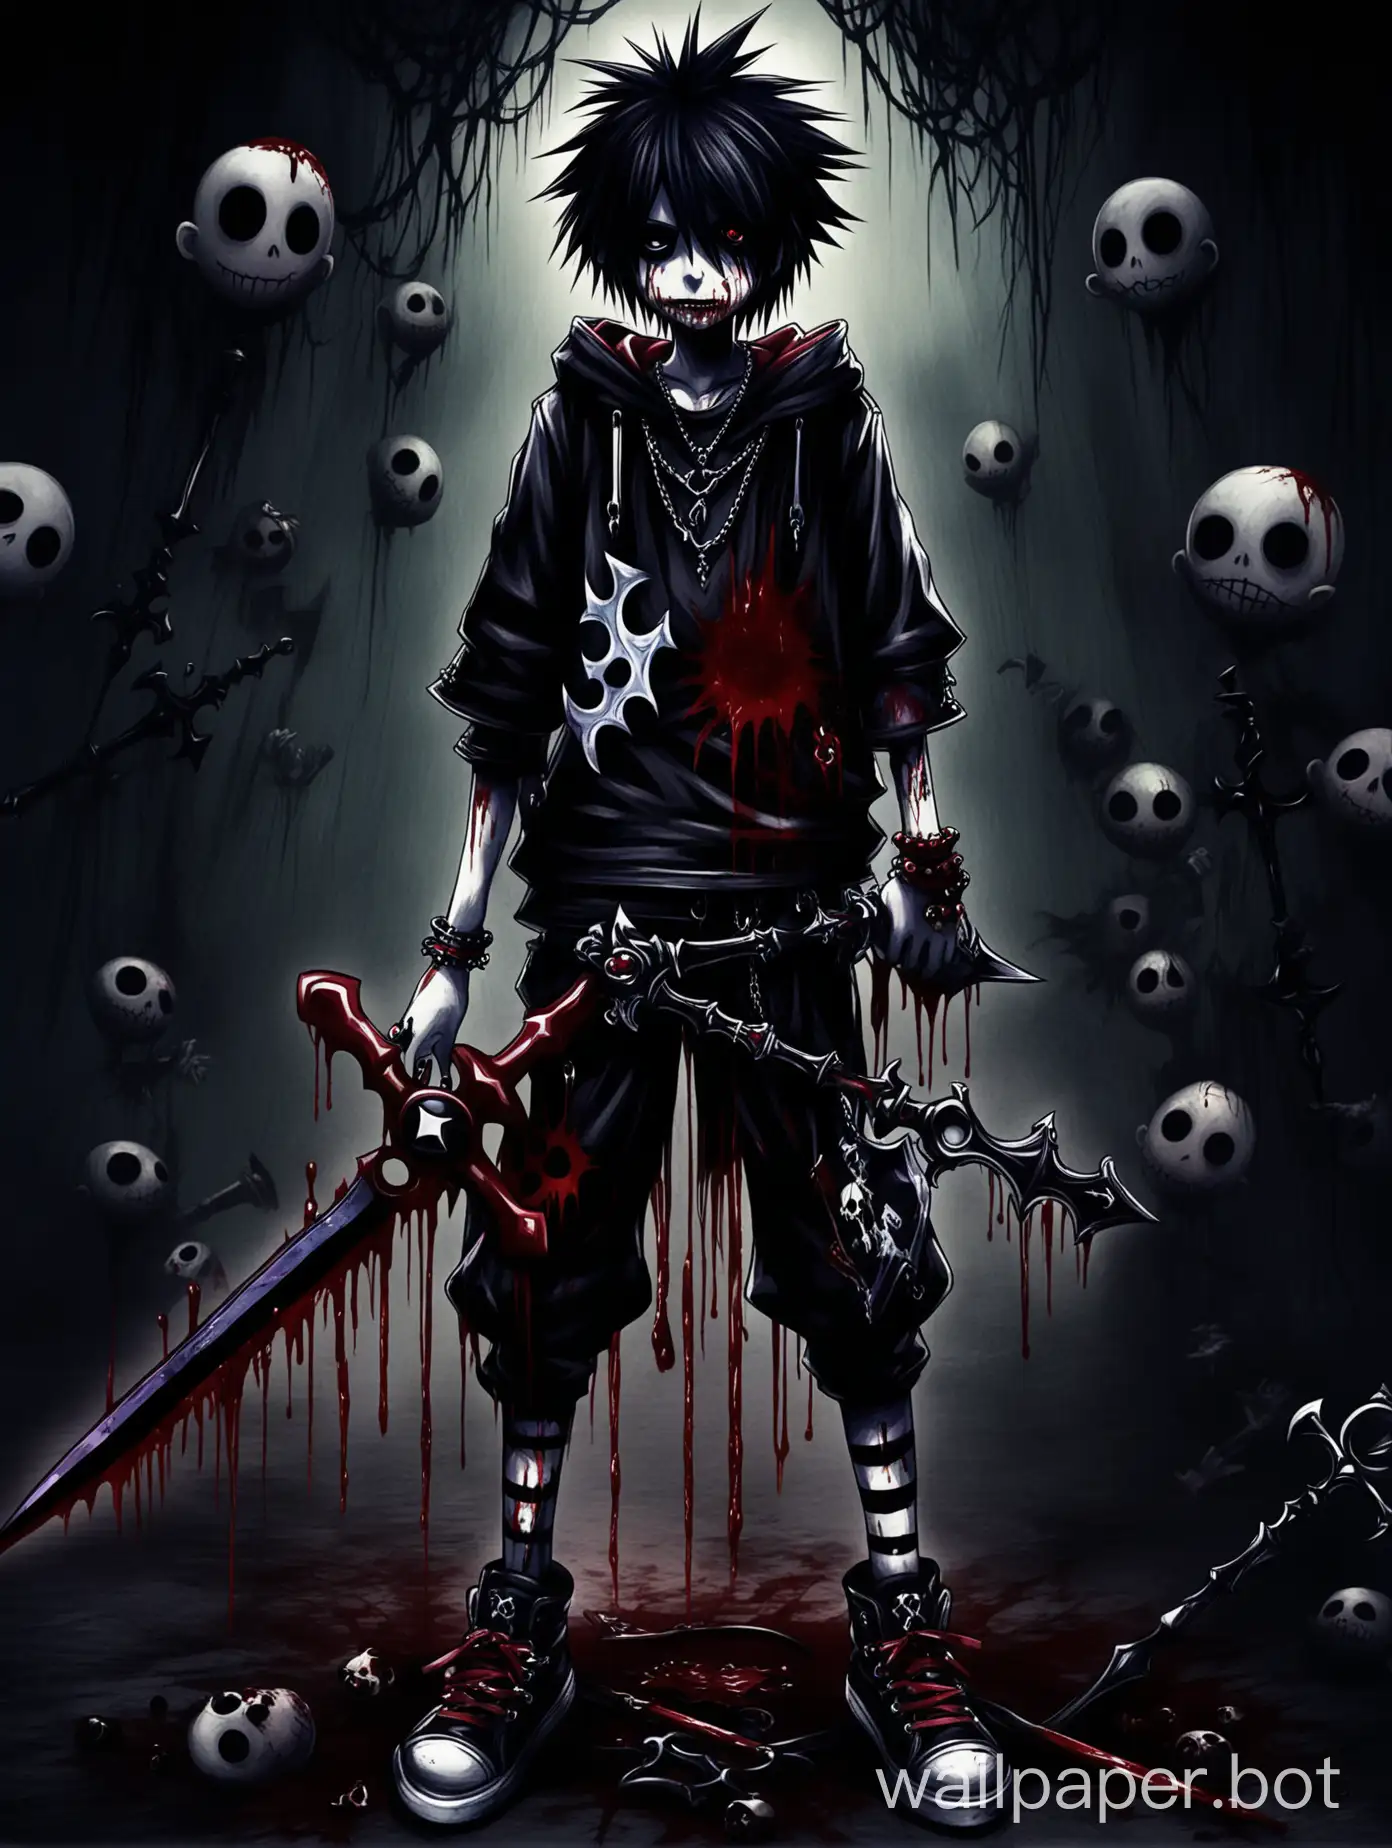 Emo Sora with his dark keyblade from kingdom hearts epic wallpaper dark colors with blood and creepy vibes